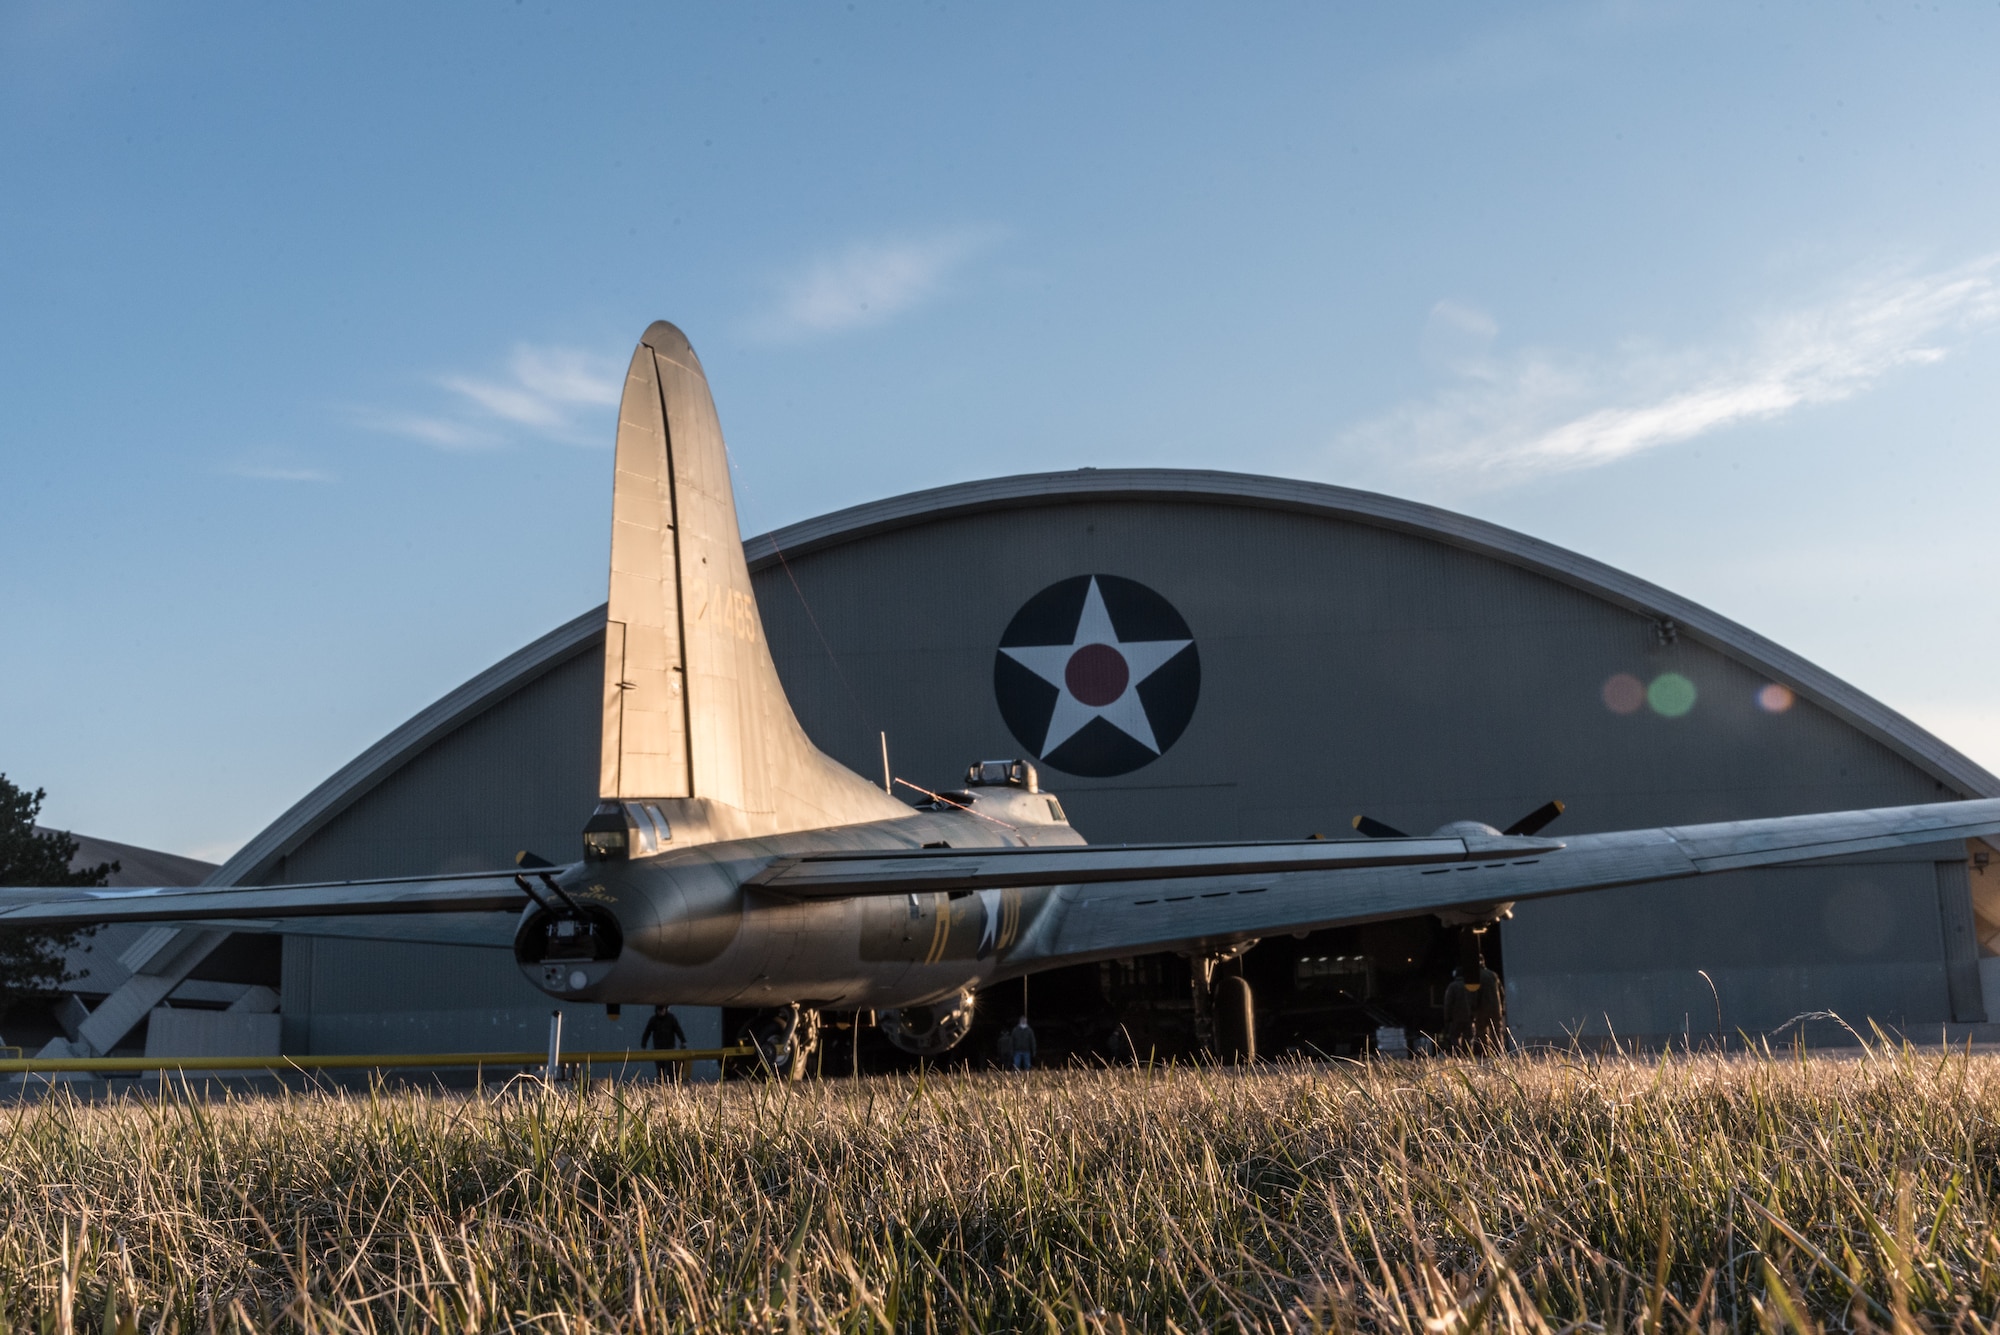 (03/14/2018) -- The B-17F Memphis Belle being moved into the WWII Gallery by restoration crews. Plans call for the aircraft to be placed on permanent public display in the WWII Gallery here at the National Museum of the U.S. Air Force on May 17, 2018. (U.S. Air Force photo by Kevin Lush)